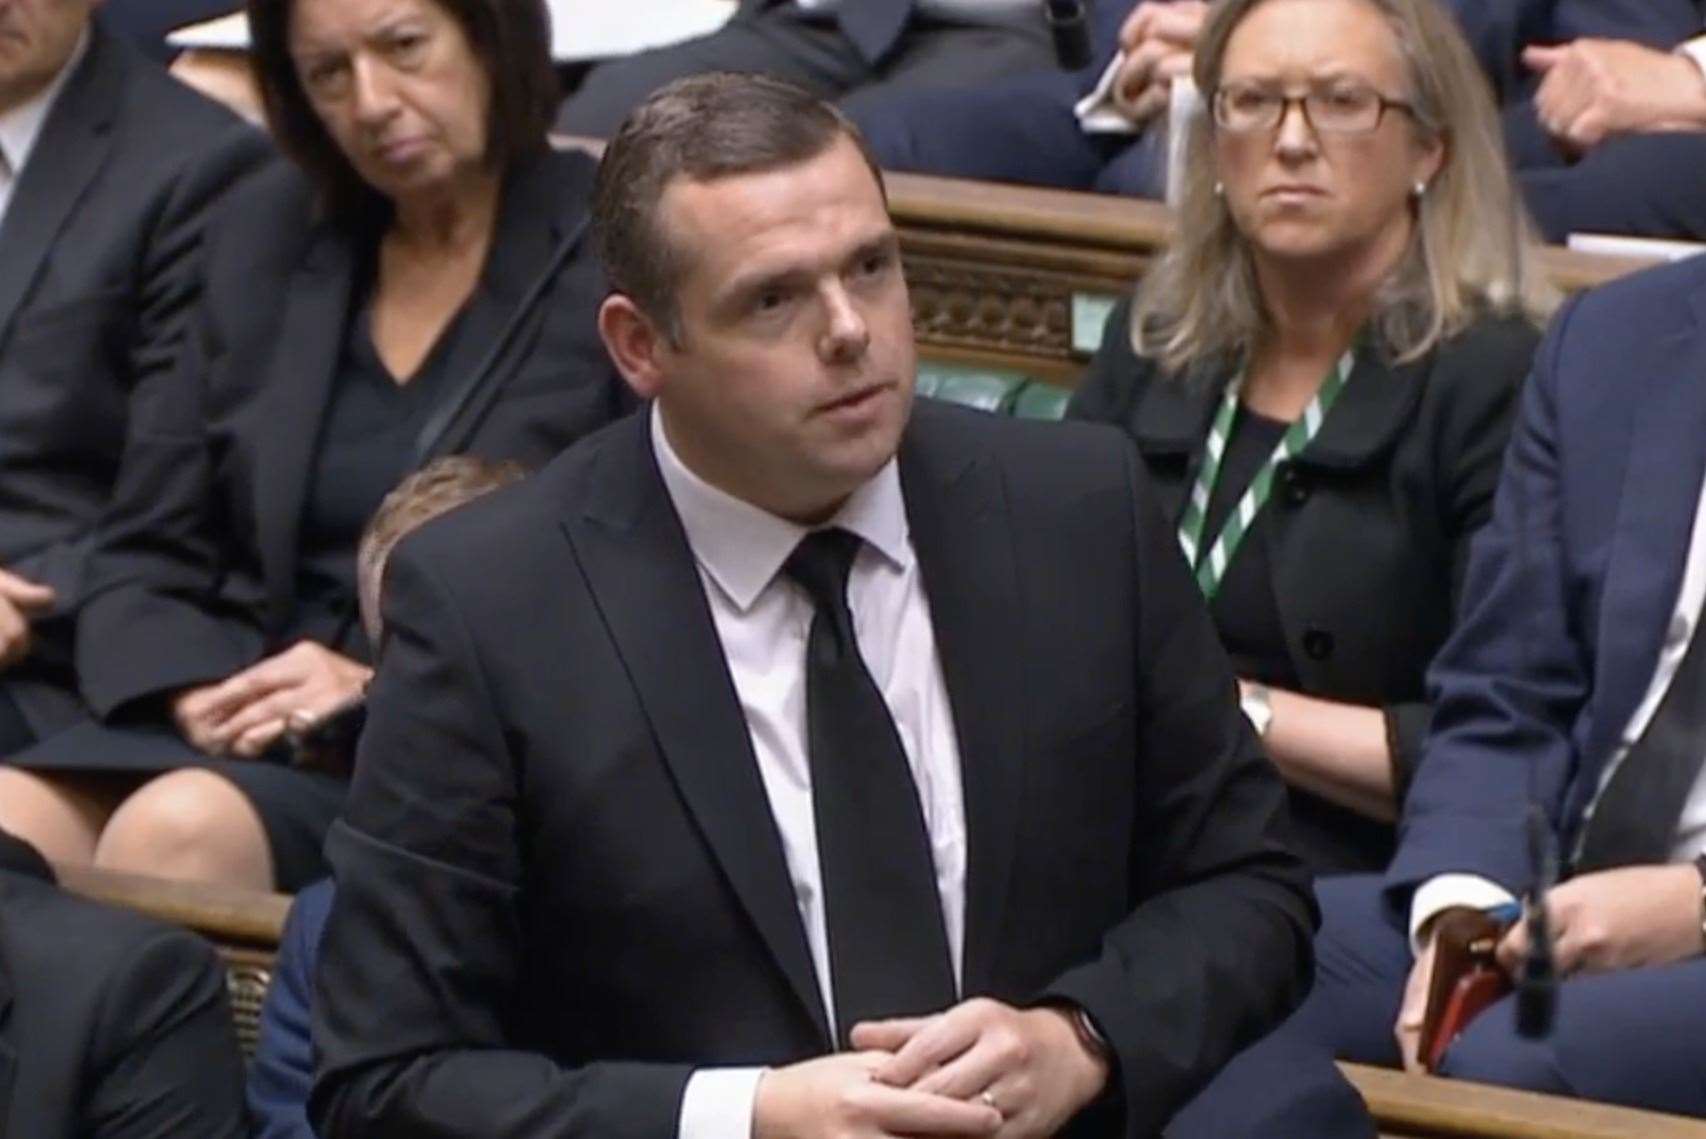 Moray MP Douglas Ross pays tribute to Her Majesty the Queen in the House of Commons.